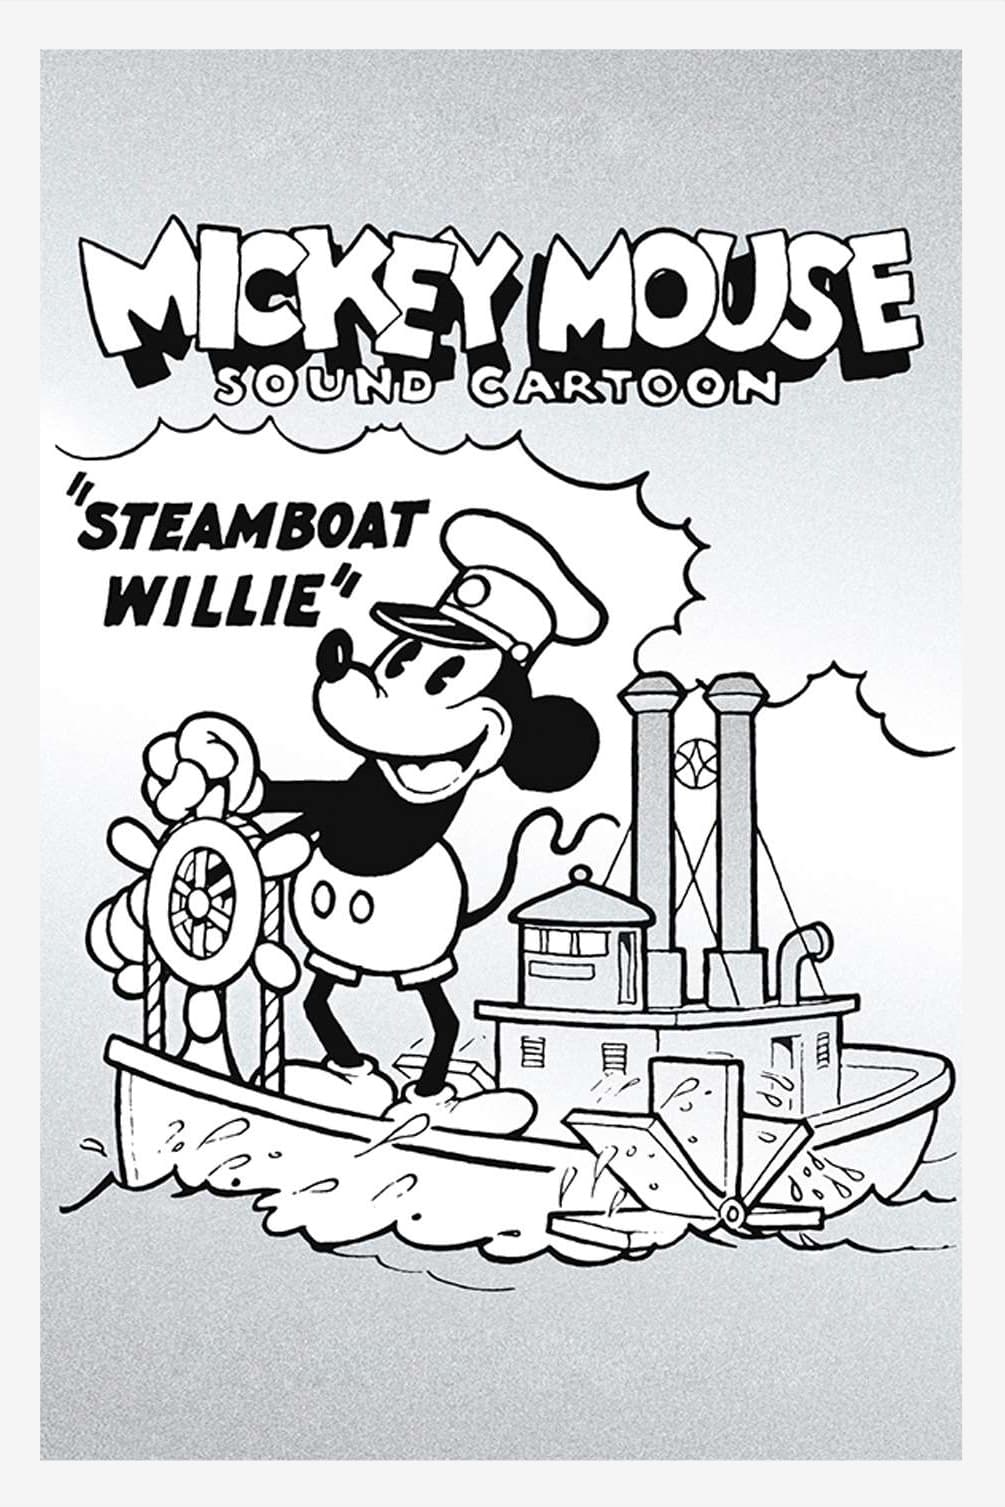 Steamboat Willie Poster